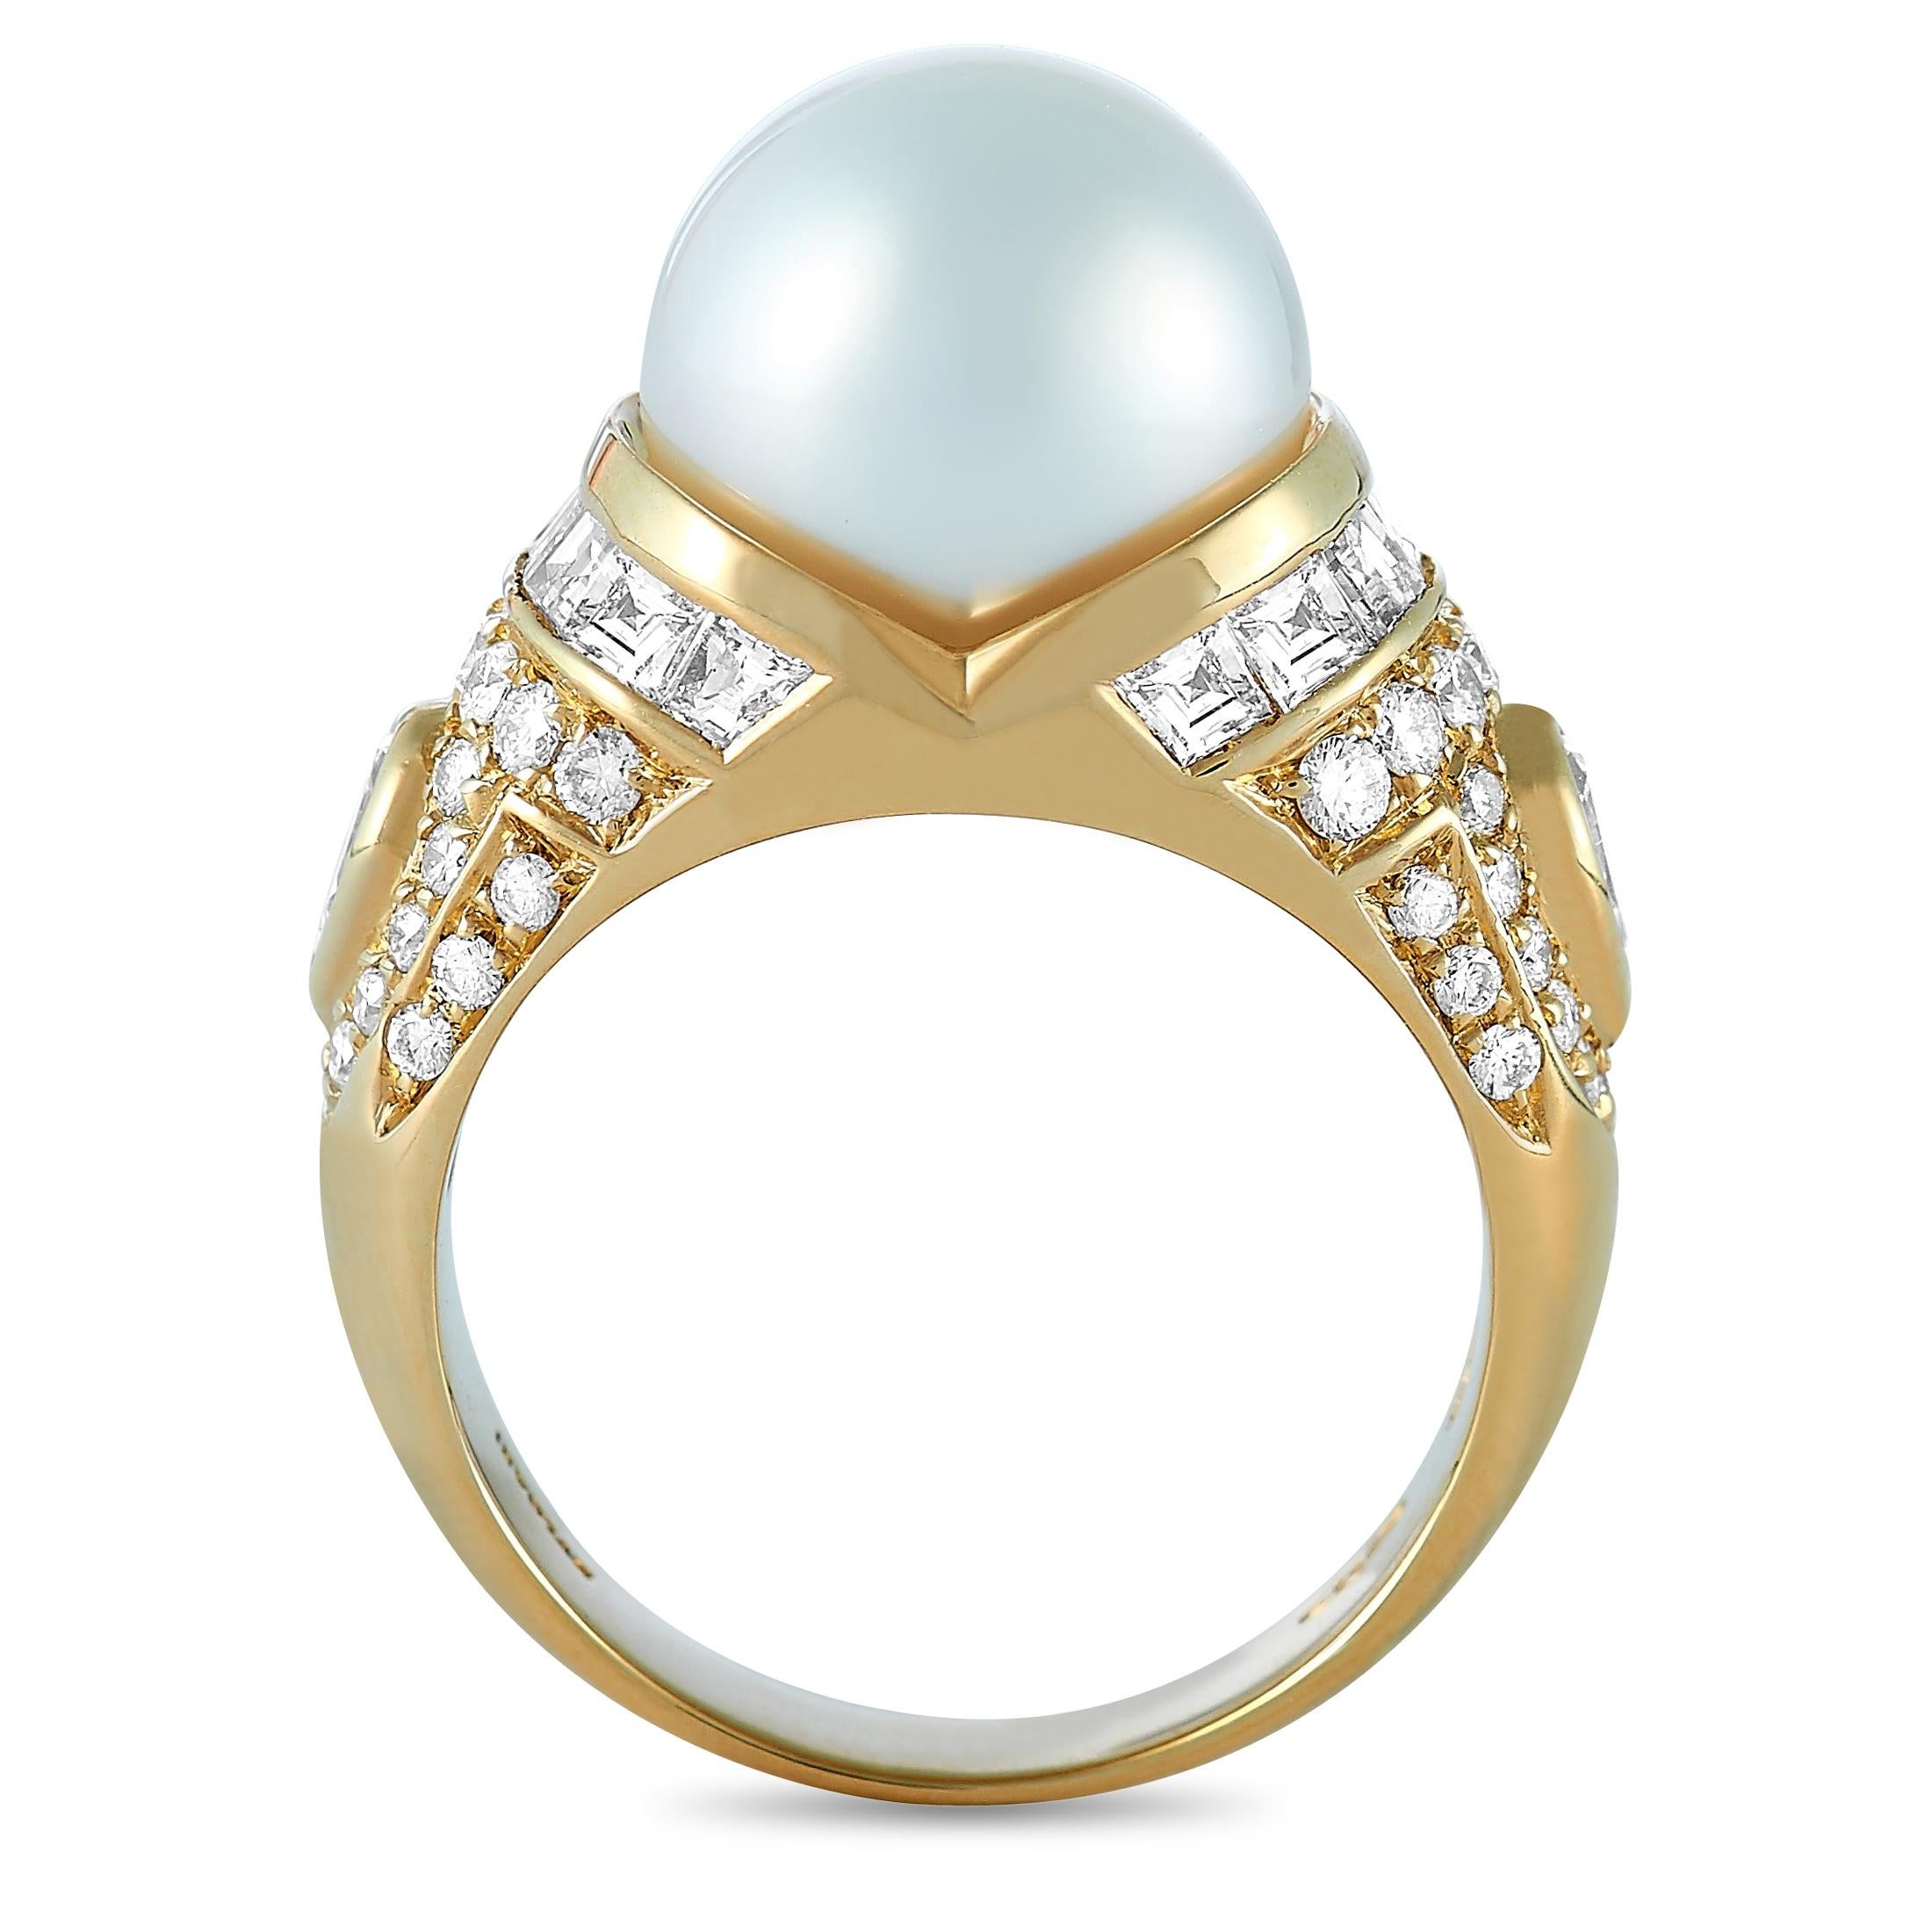 This Bvlgari ring is made of 18K yellow gold and embellished with diamonds and a pearl. The diamonds feature EF color and VS clarity and total approximately 1.25 carats. The ring weighs 10.3 grams and boasts band thickness of 3 mm and top height of